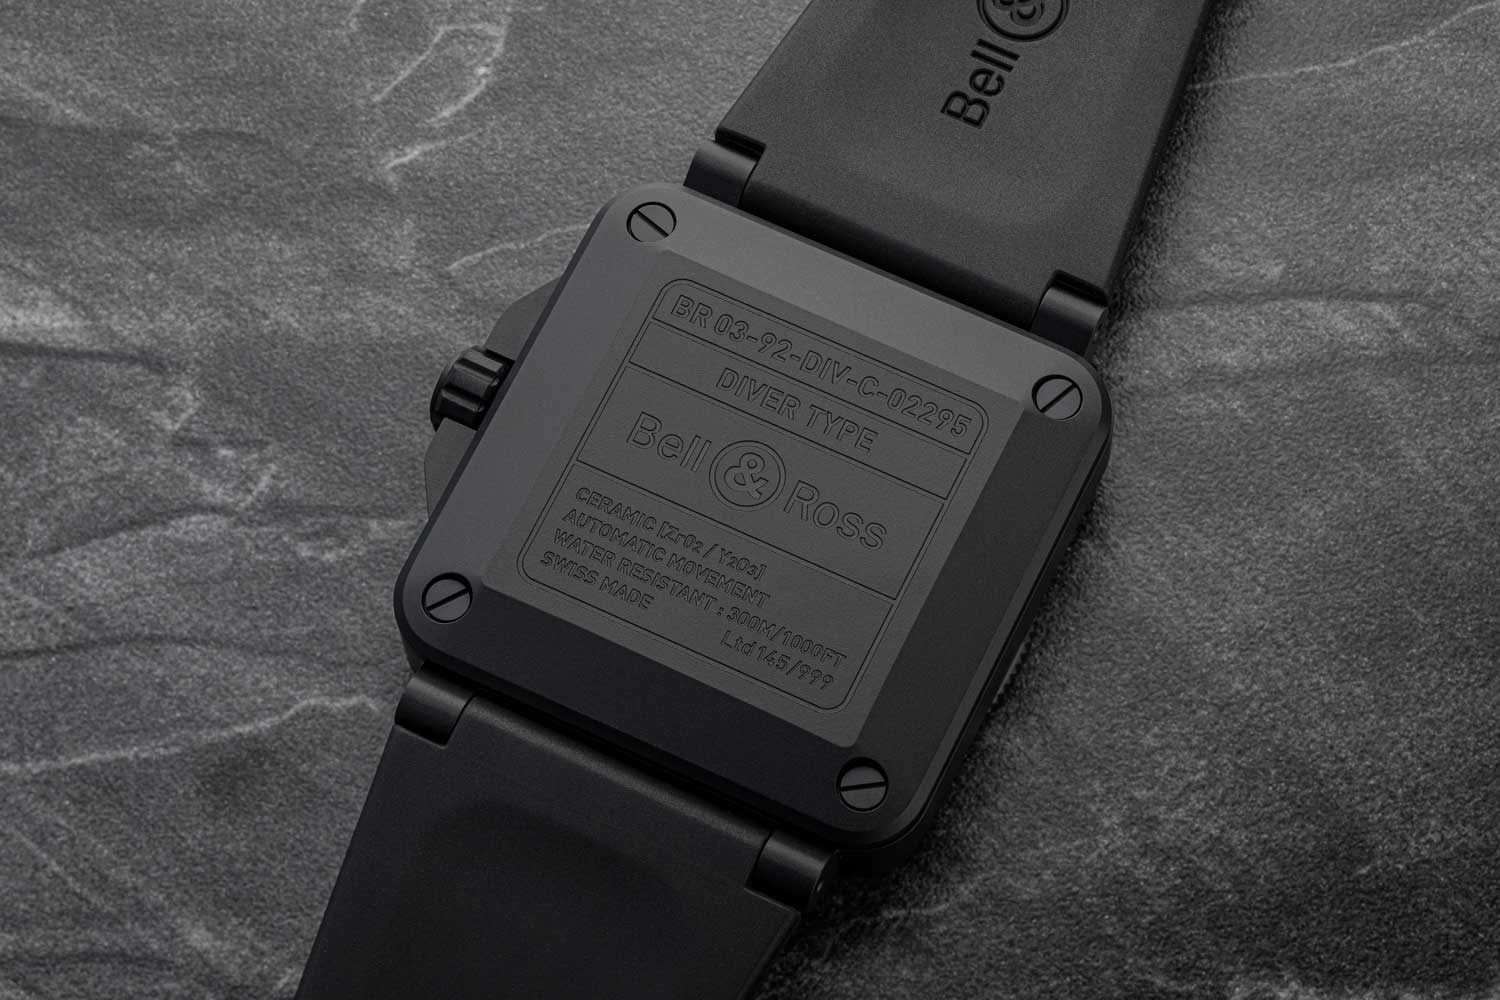 Water resistant to 300 meters, the BR03-92 is armored with a steel interior and ceramic exterior case to withstand the rigors of underwater exploration. (© Revolution)